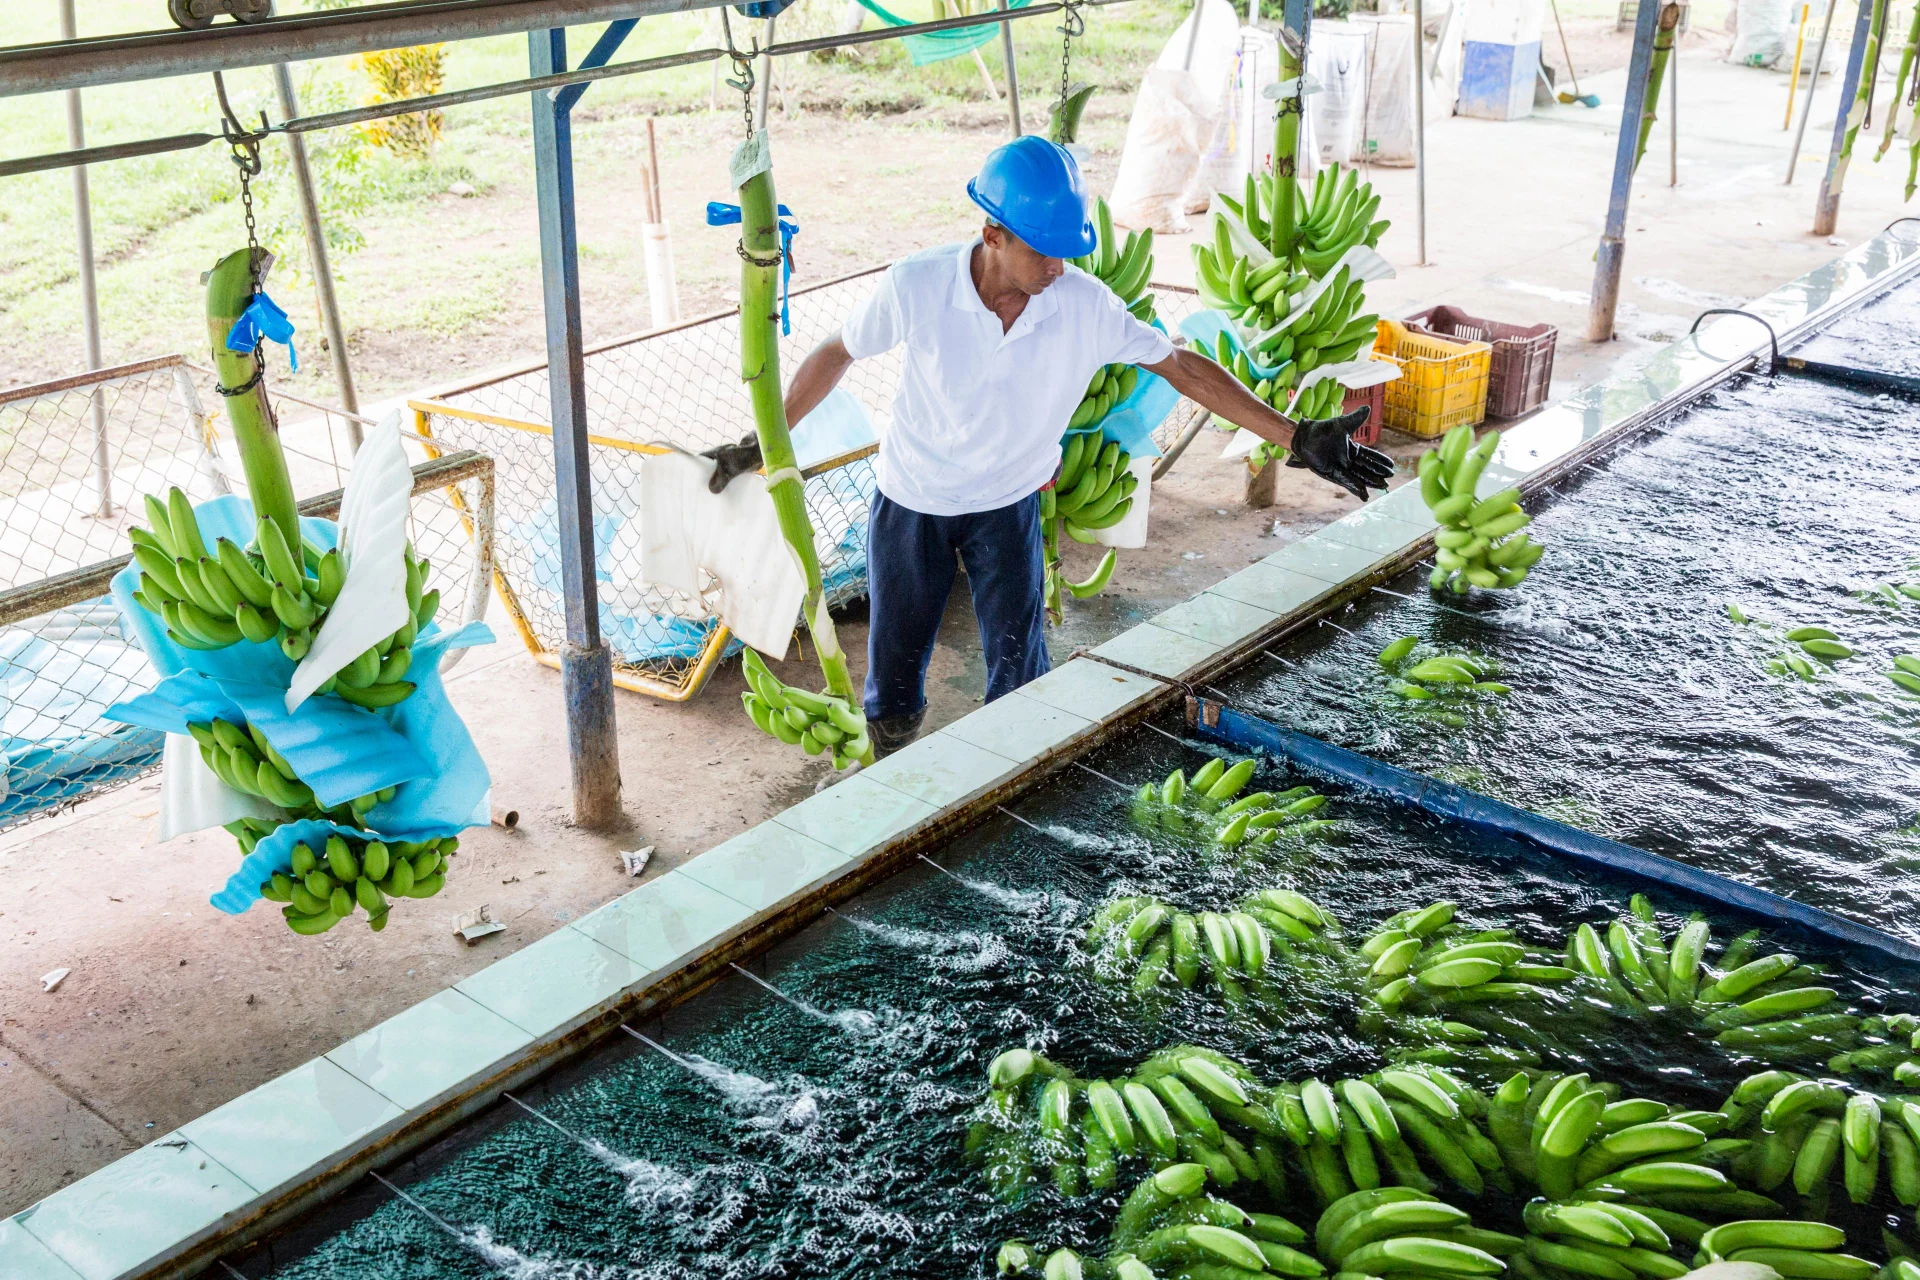 Banana trees are washed in a water basin